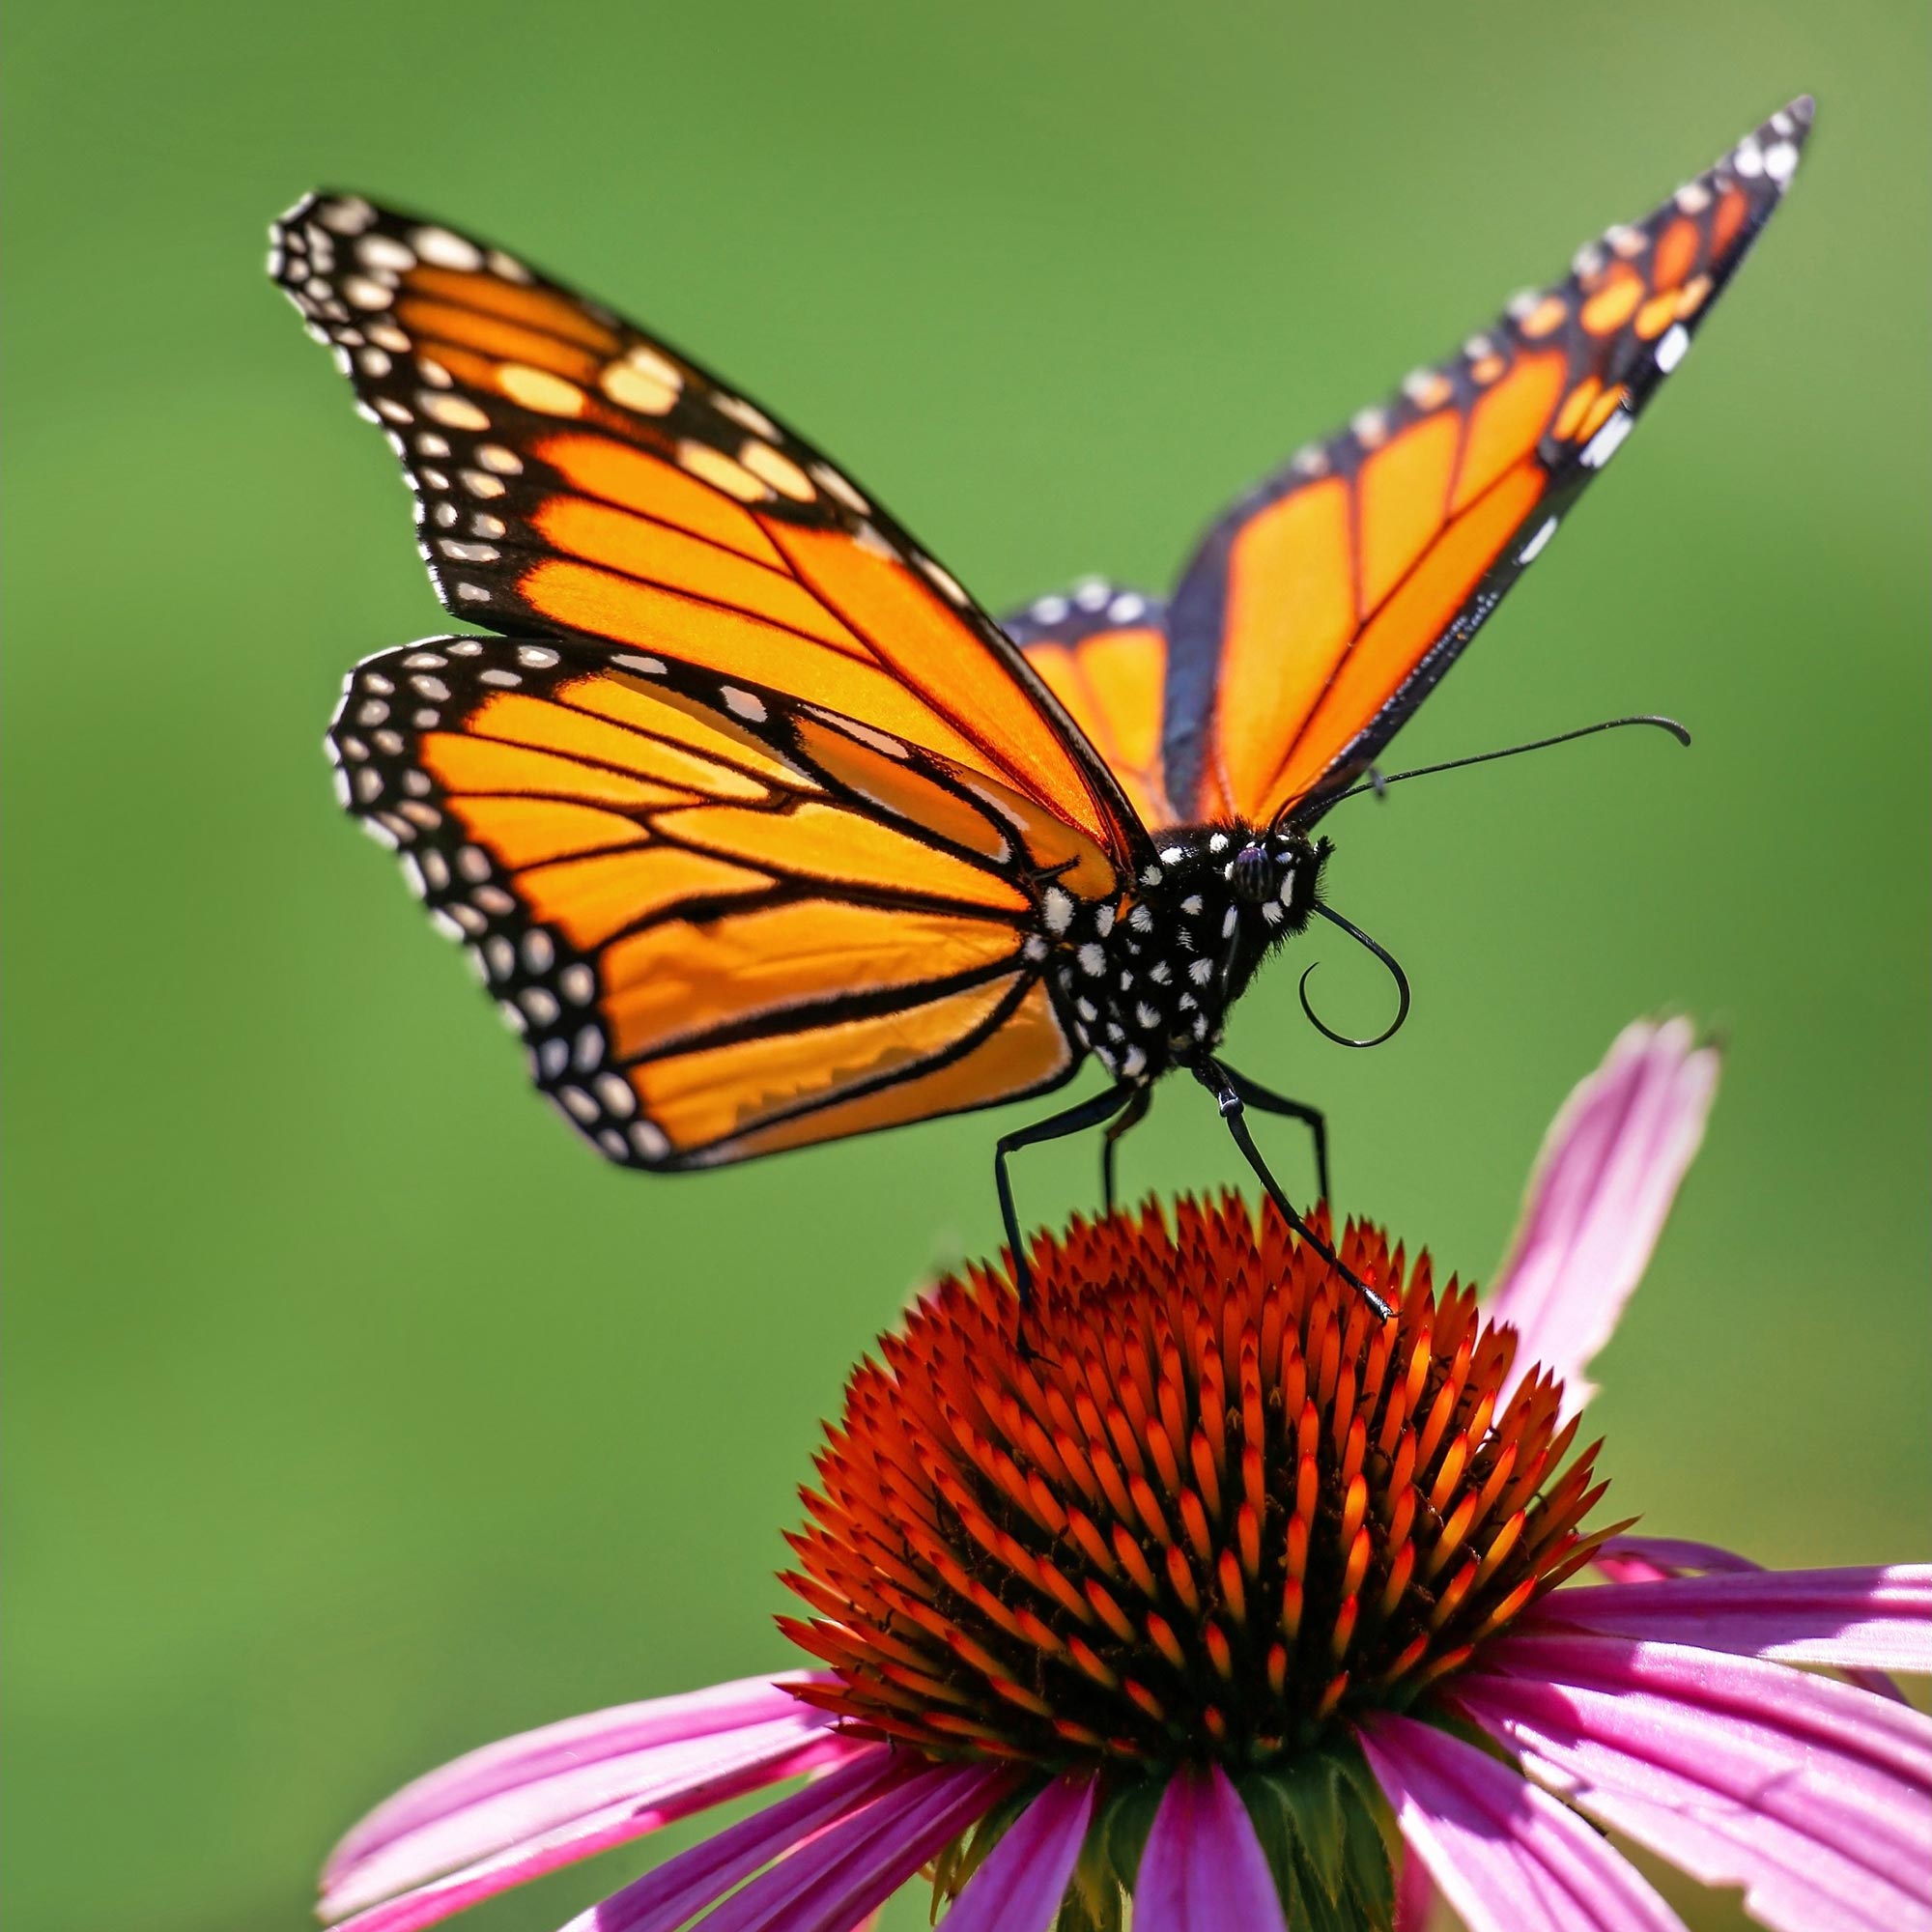 Why Is the Eastern Monarch Butterfly Disappearing? Is There Something We Can Do About It? - SciTechDaily